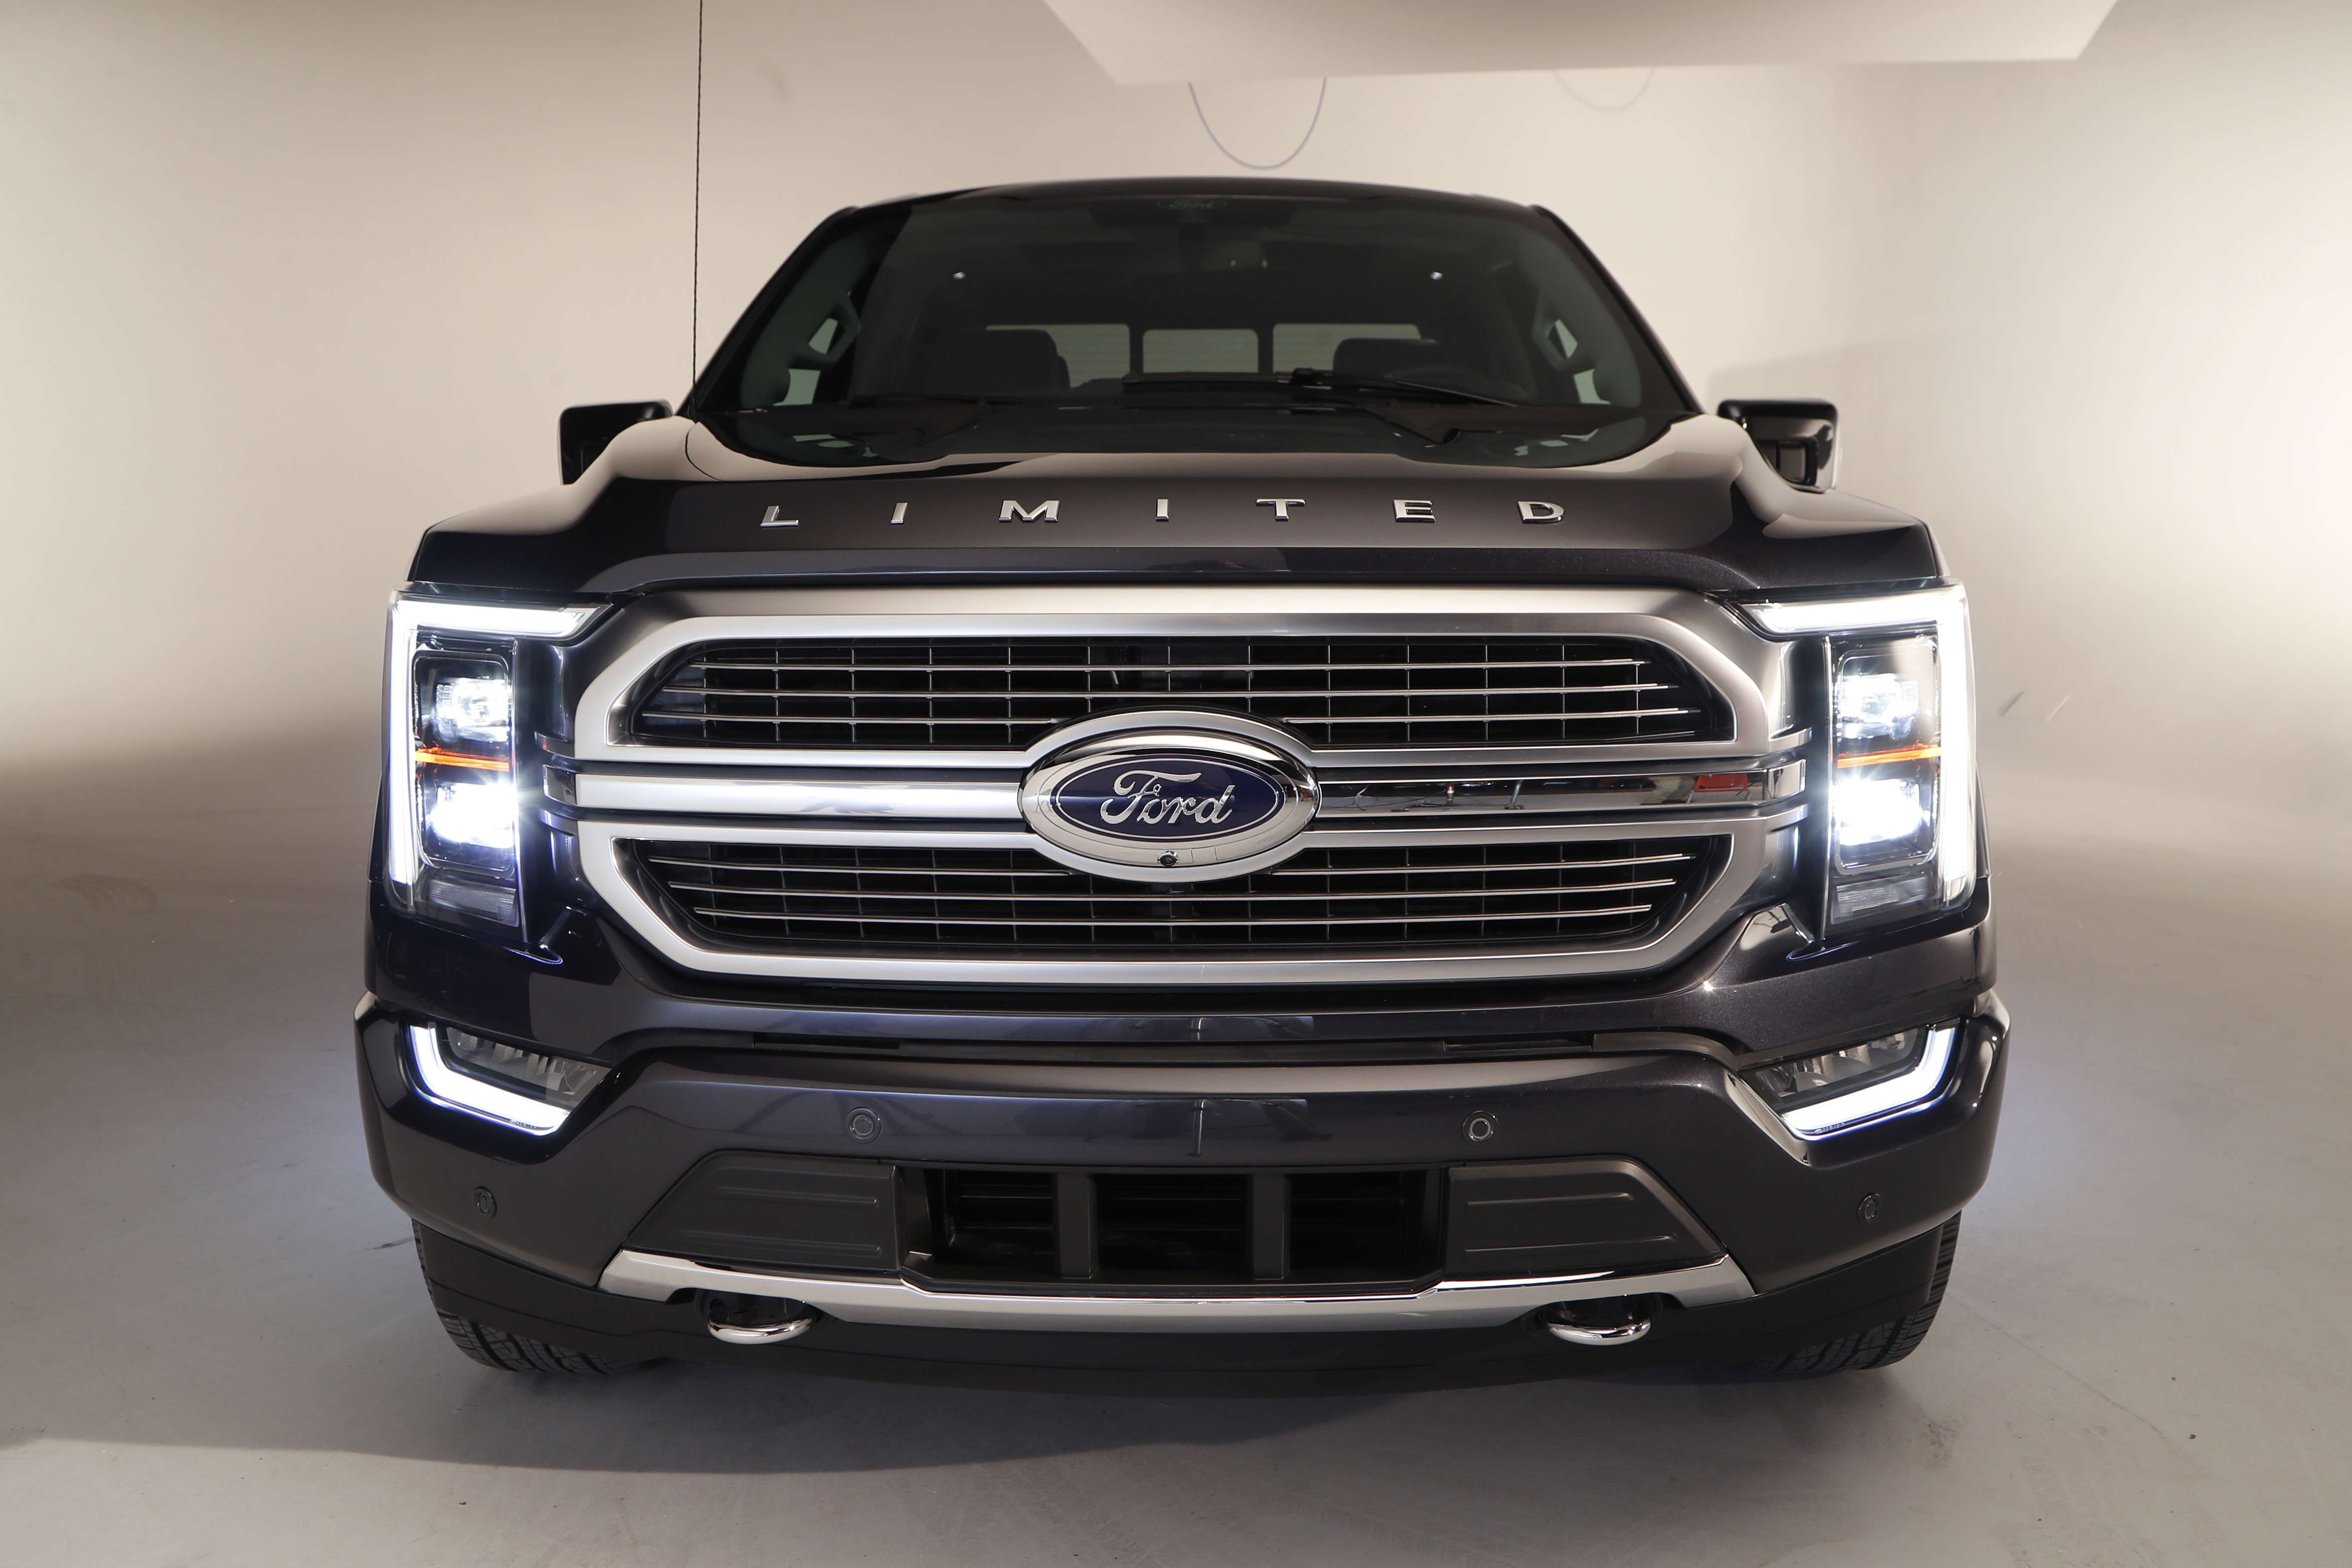 Ford F150 Price: Ford F-150 gets a revamp, interior & hands-free driver  assist system remain the main focus - The Economic Times